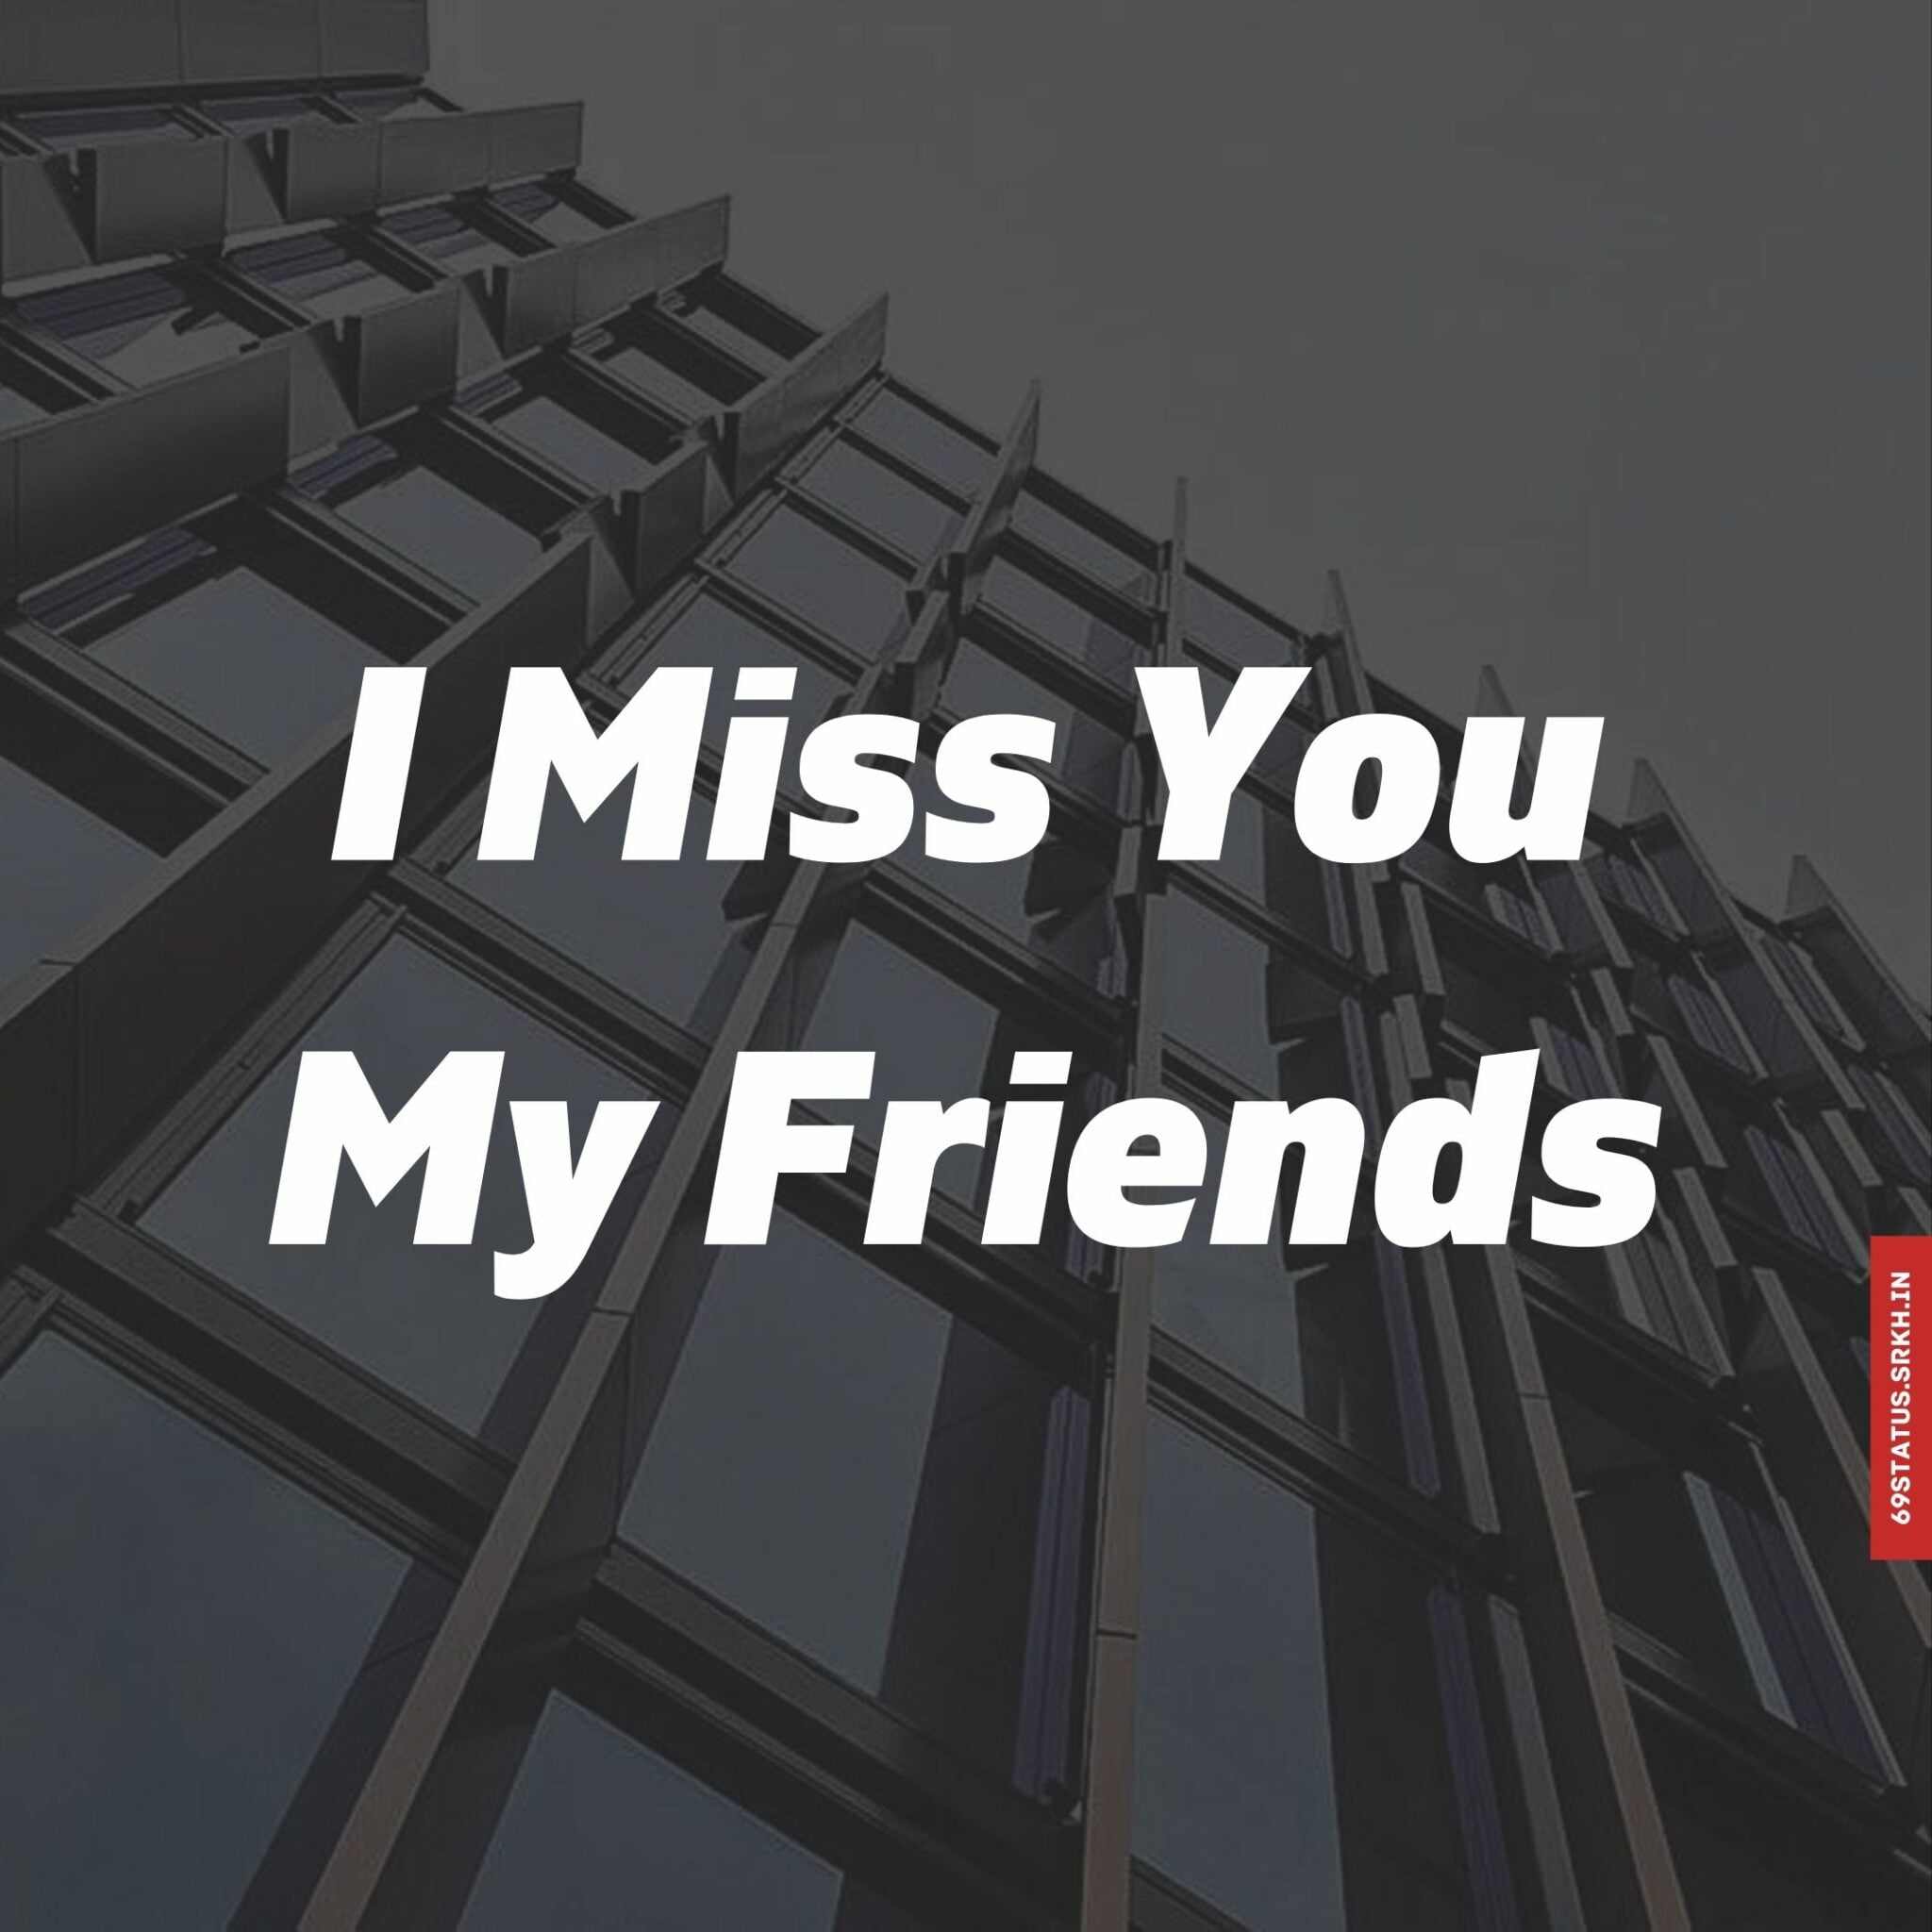 Friends miss you images